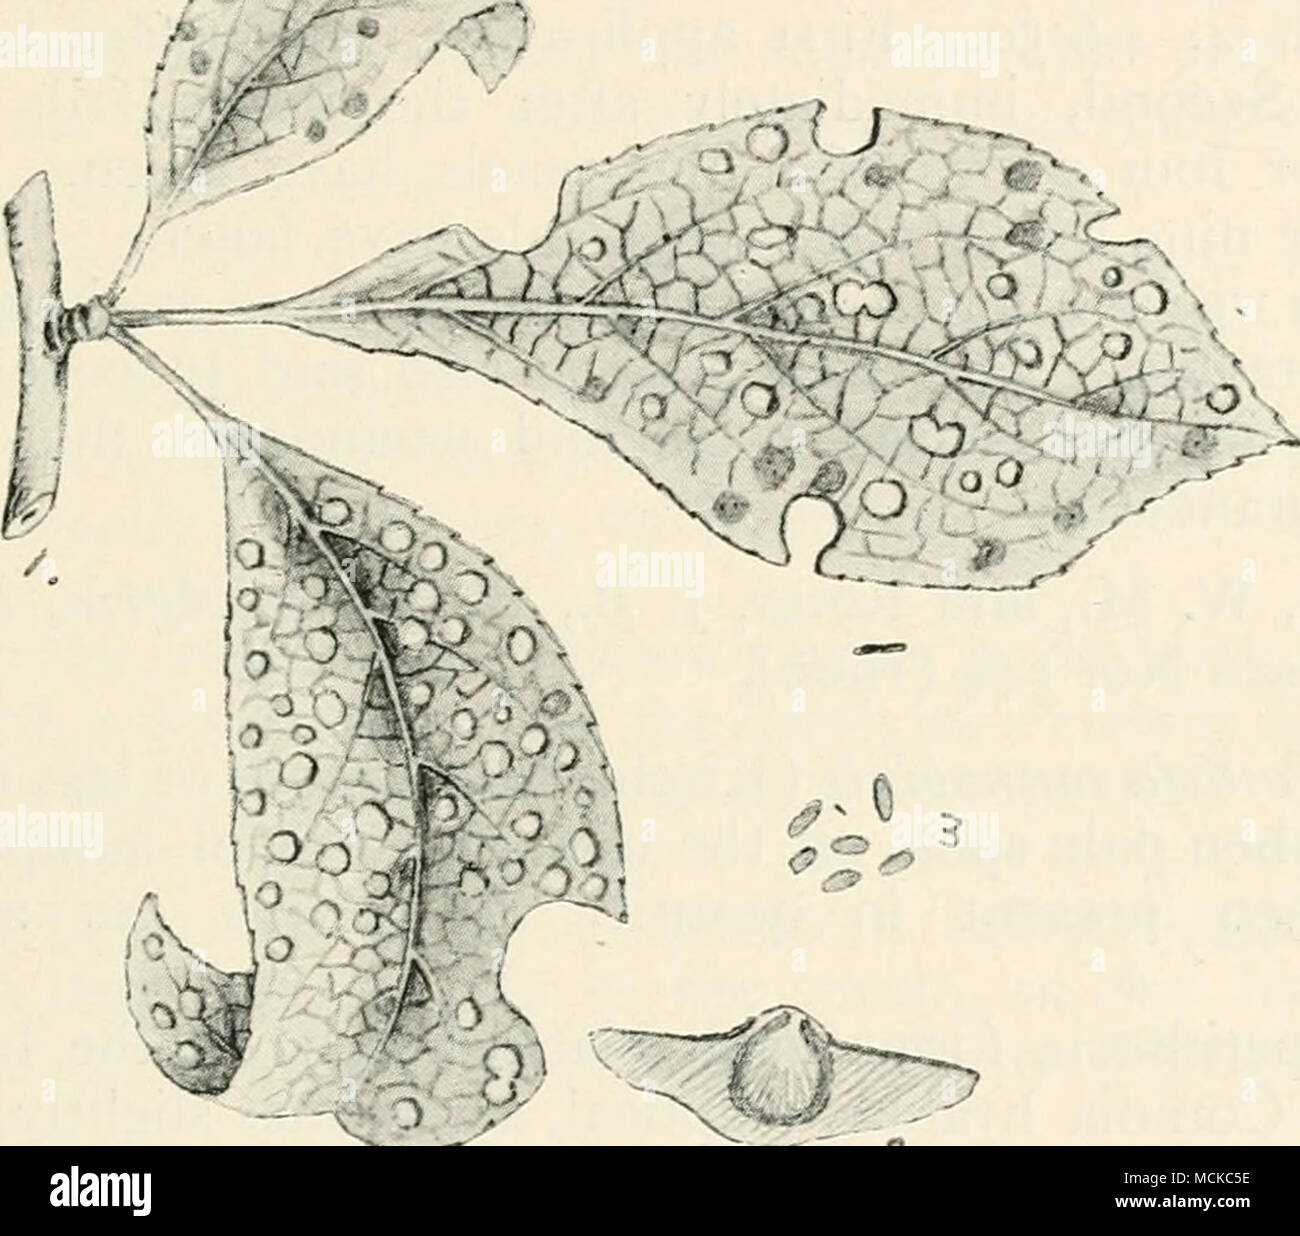 . Fig. 12^.âPhyllosticta frunicola. 1, apple leaves attacked by fungus ; 2, section through a perithecium embedded in the substance of the leaf; 3, conidia. Figs. 2 and 3 mag. Perithecia minute, immersed in the matrix, the mouth alone rupturing the epidermis, appearing as minute raised points; conidia hyaline, broadly elliptical, continuous, sur- rounded by a mucilaginous sheath which runs out at one end of the conidium as a hyaline appendage, which is apt to be overlooked, 8-10 x 5-6 ji. I have repeatedly met with perithecia containing conidia precisely similar to those described above, durin Stock Photo